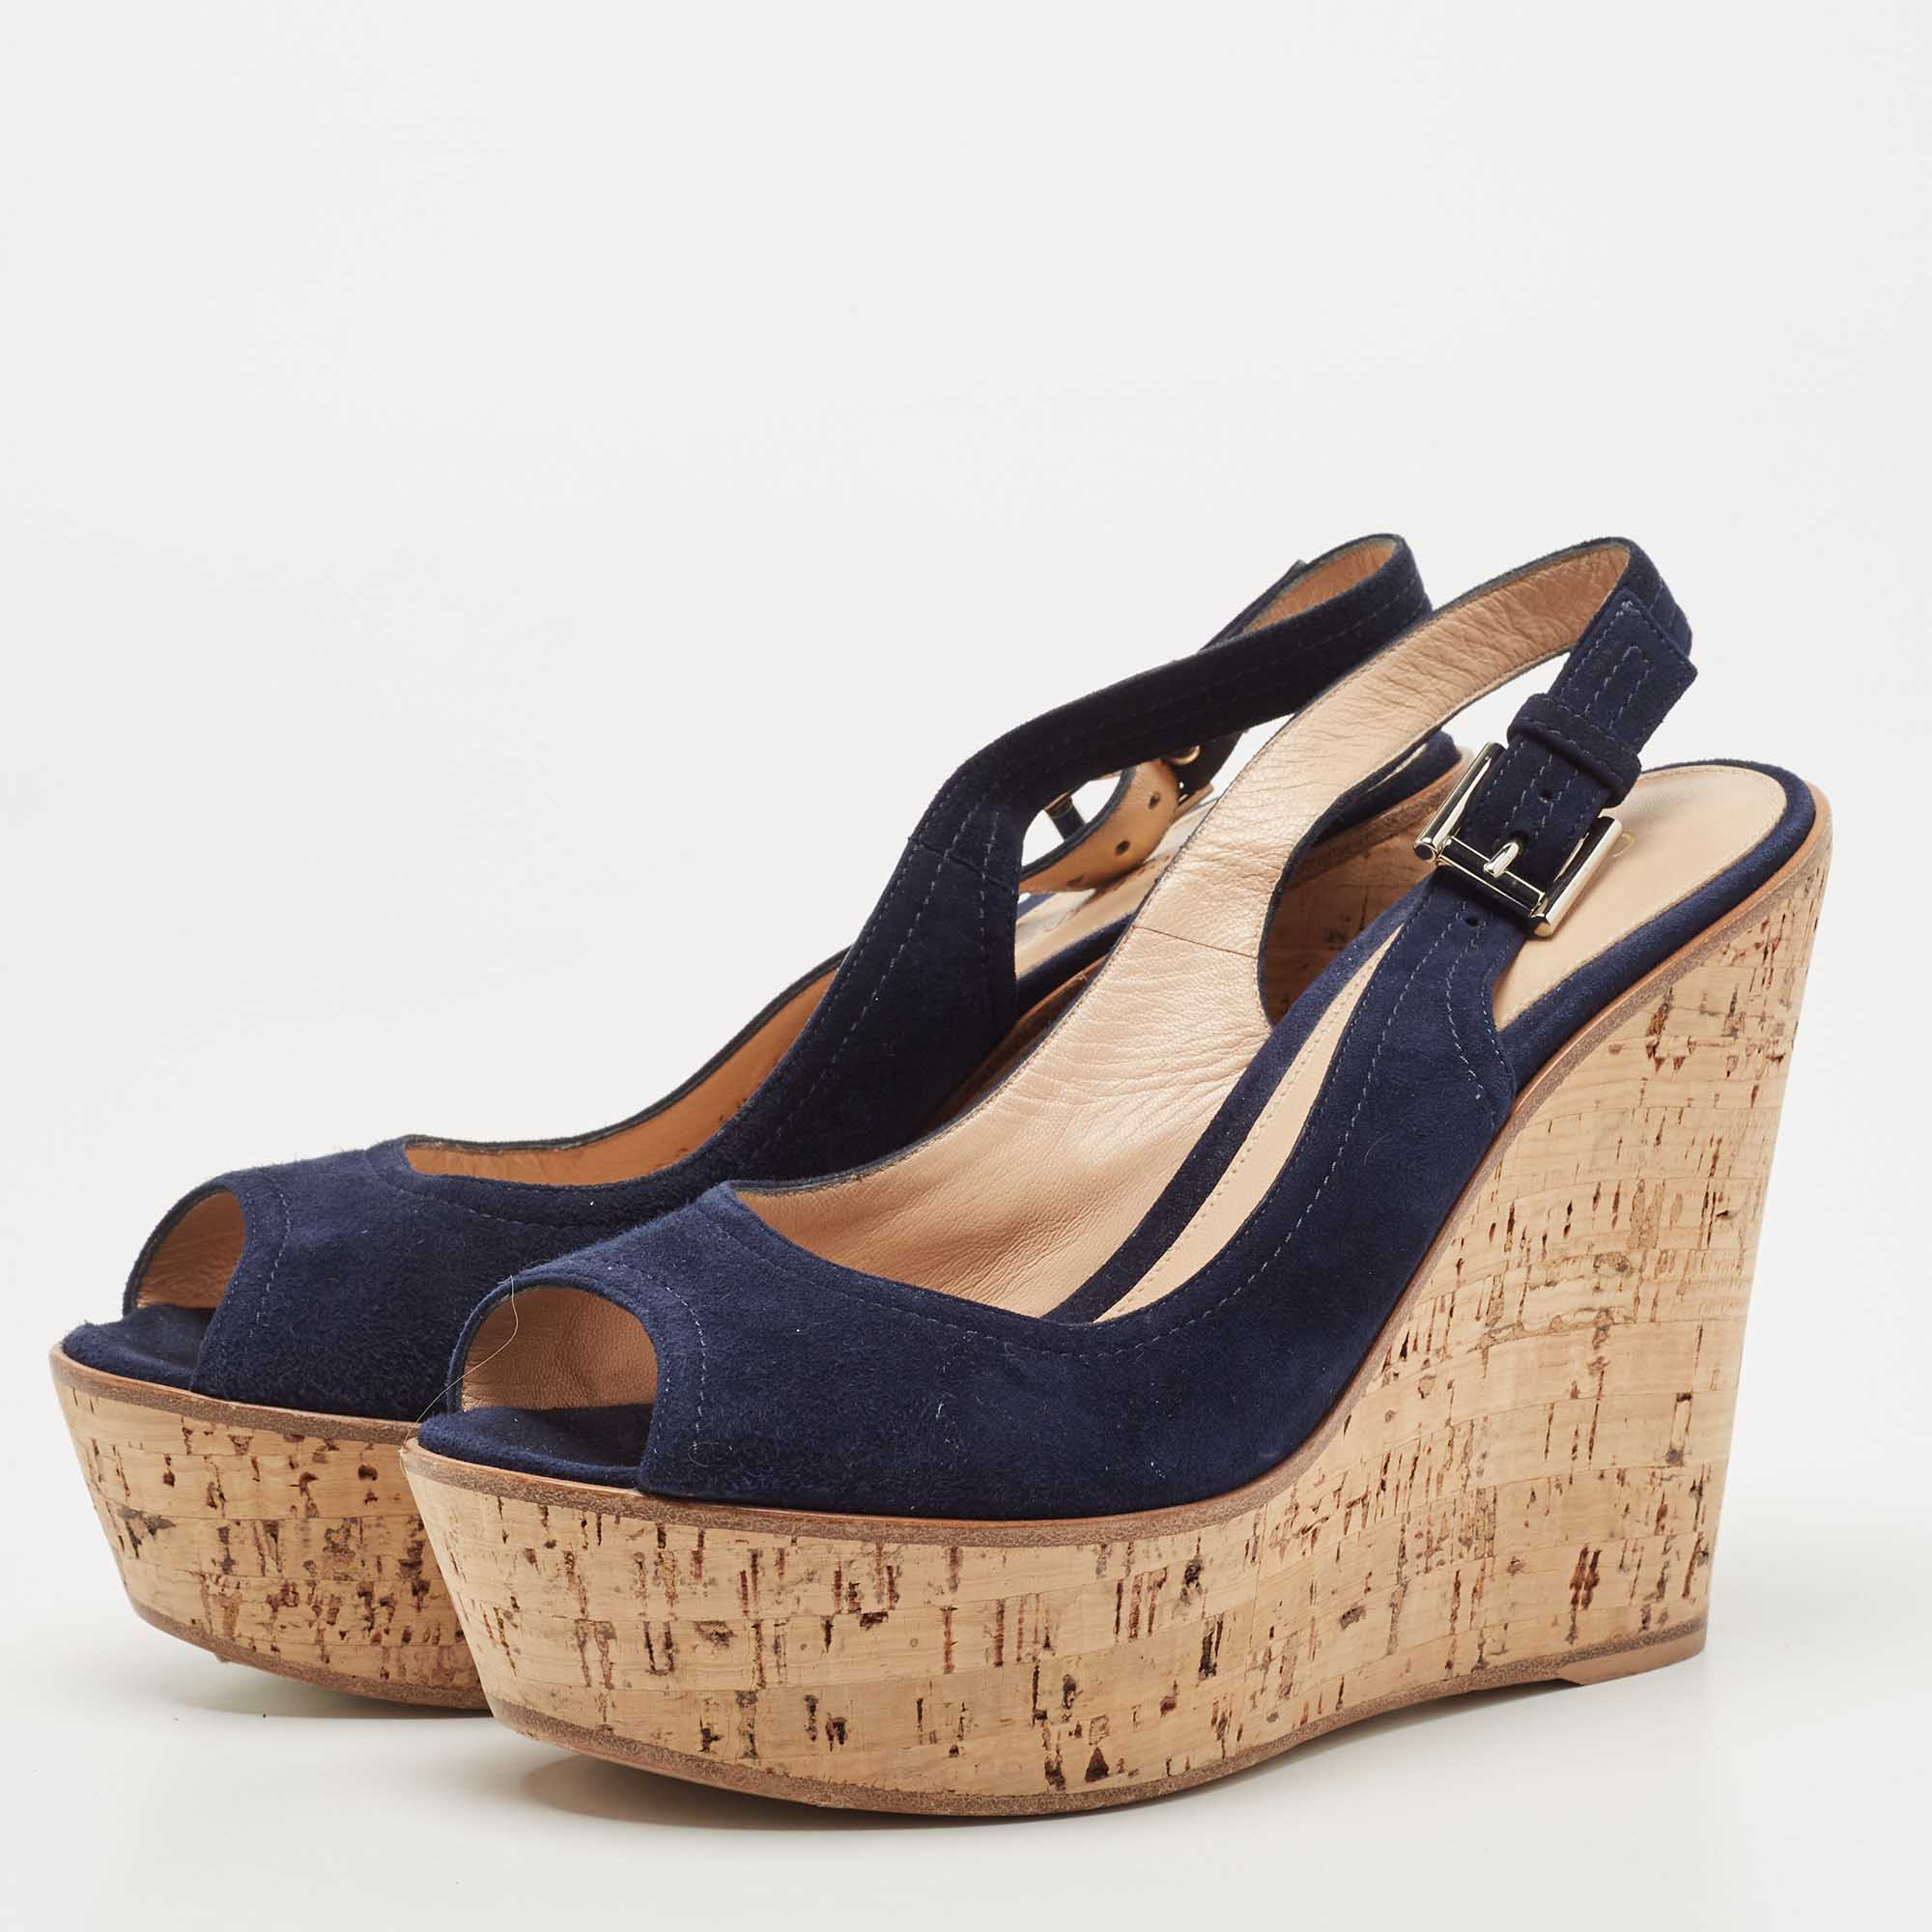 

Gianvito Rossi Navy Blue Suede Leather Cork Wedge Peep Toe Platform Slingback Sandals Size